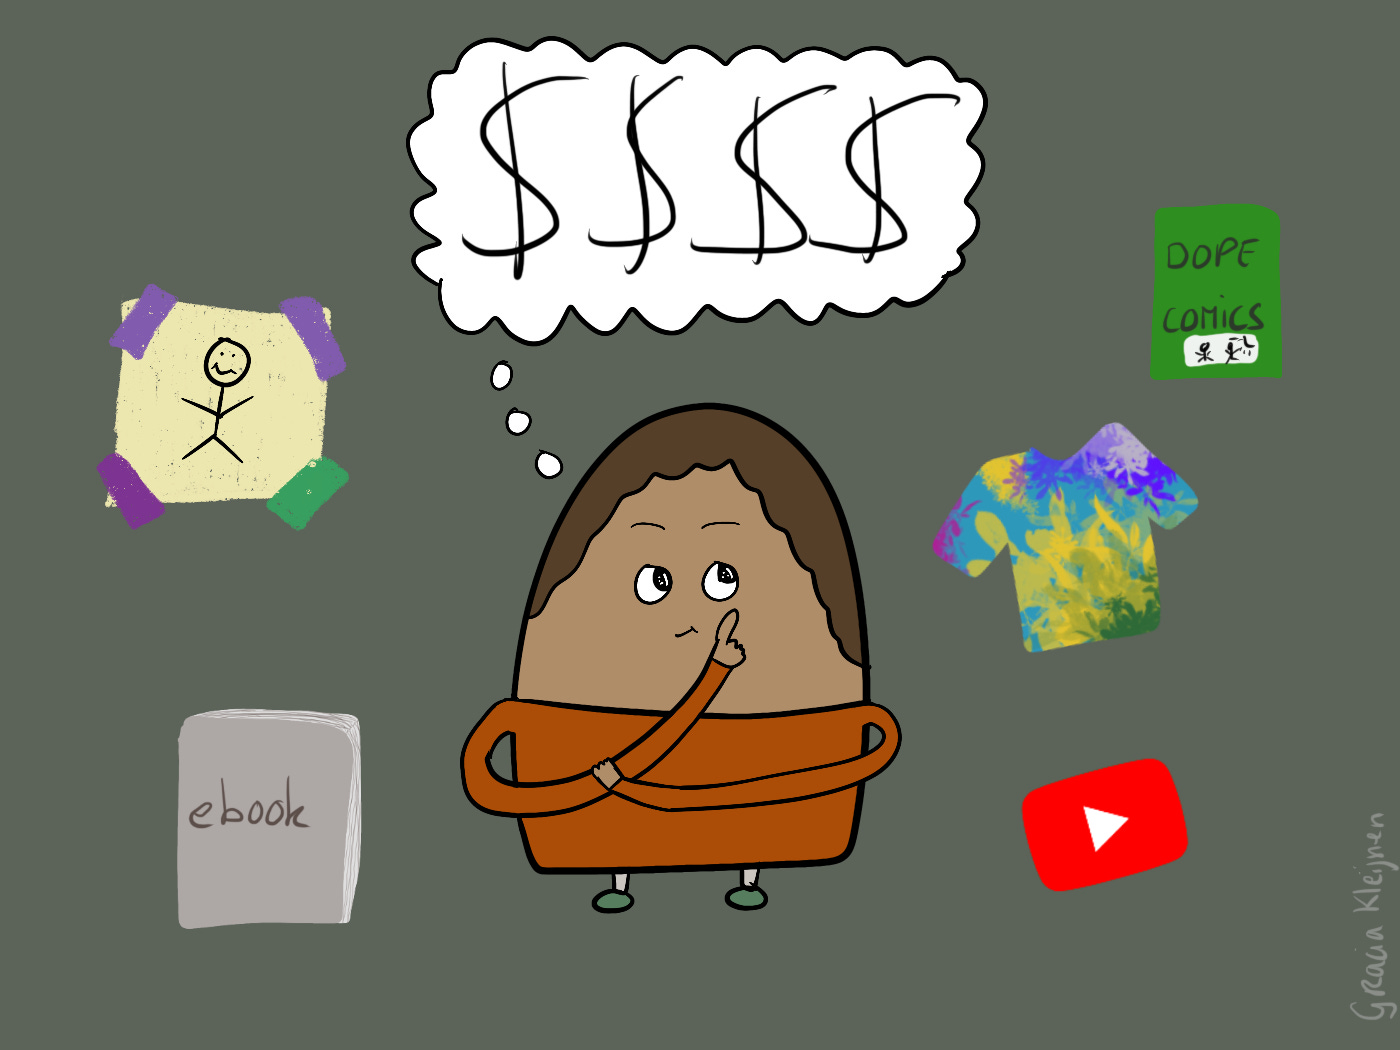 The Blob thinking about side hustle money. The Blob is wearing its normal attire: an orange longsleeve, this time with greyish pants and green shoes. On the left a yellow stickie note with a stick figure, stuck on the wall with multi-colored pieces of tape. Lower-left corner: a grey ebook. Top-right: dope comics. Below that a multi-colored shirt with a flowery print and a YouTube logo.